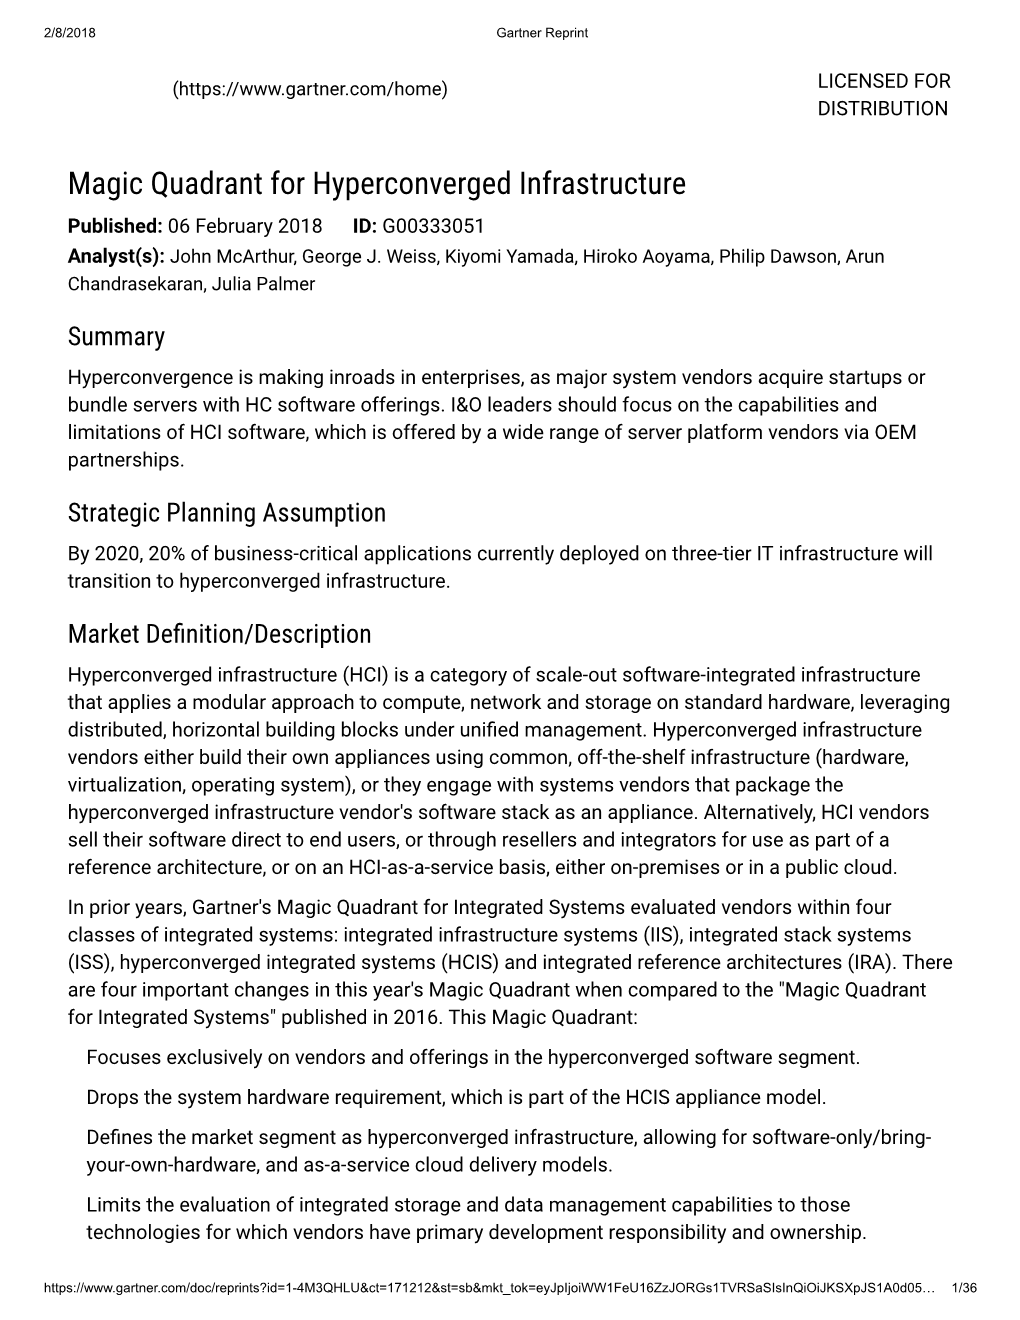 Magic Quadrant for Hyperconverged Infrastructure Published: 06 February 2018 ID: G00333051 Analyst(S): John Mcarthur, George J